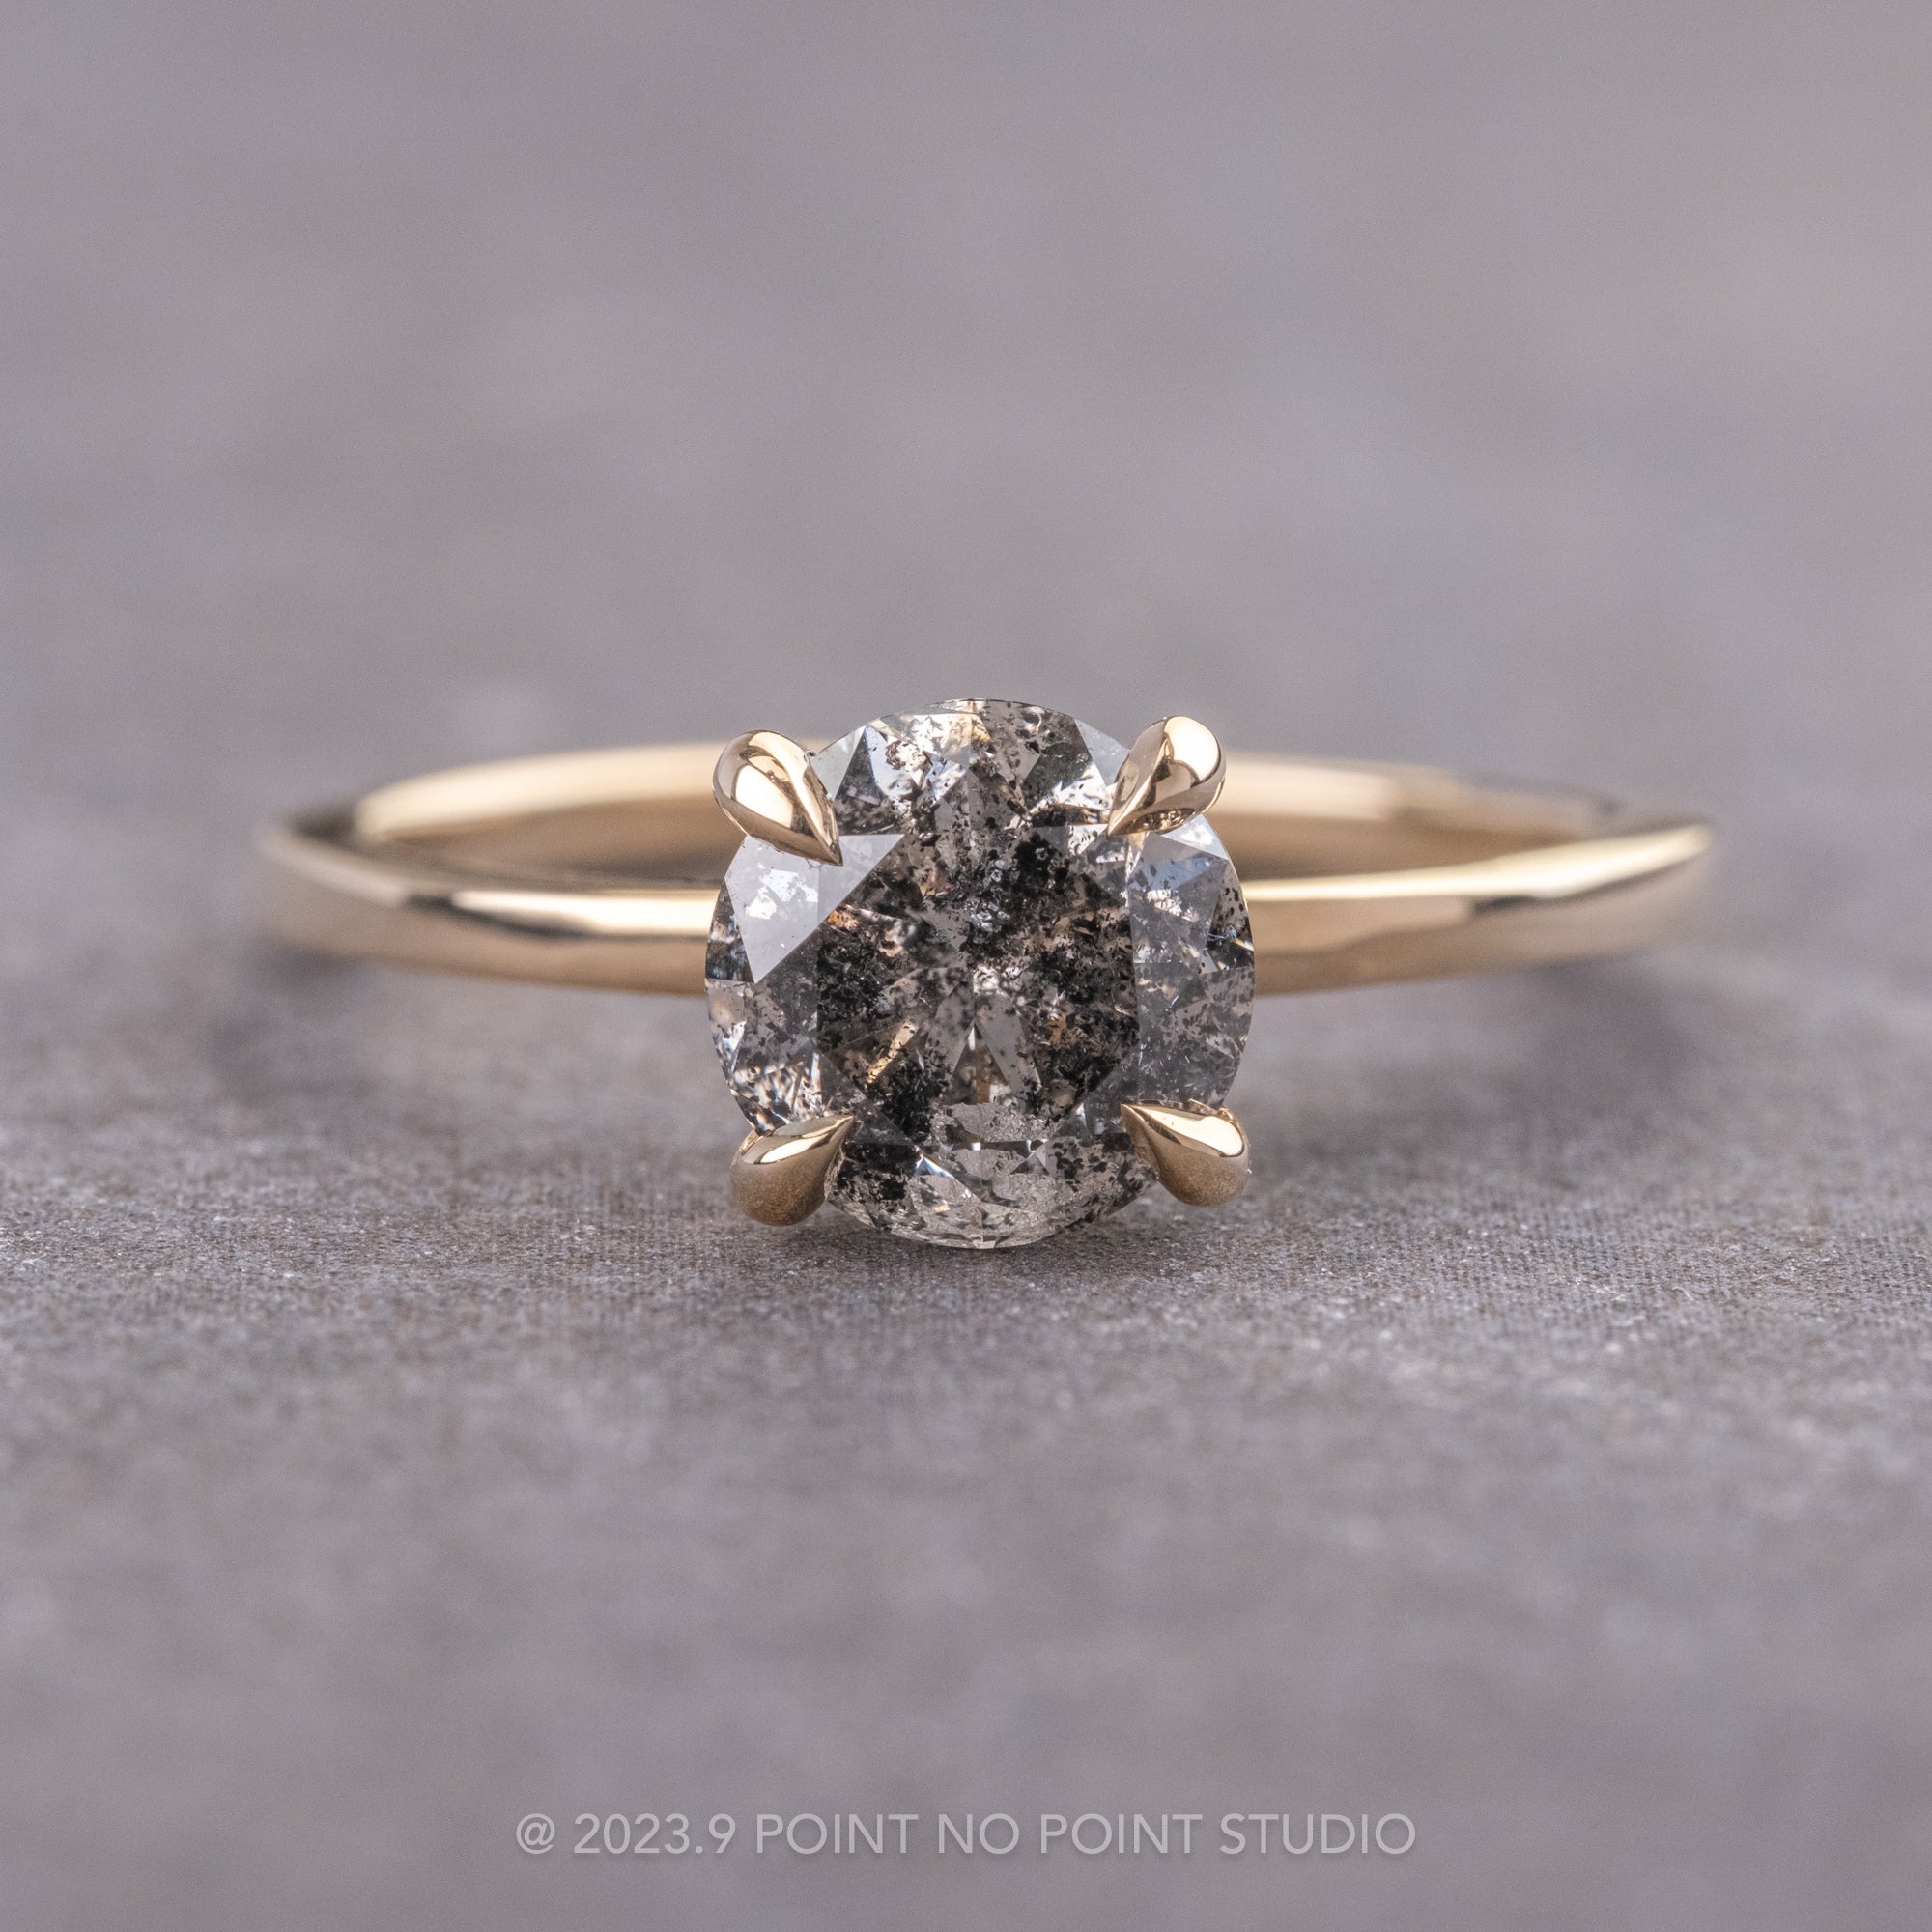 CLASSIC & TIMELESS: SOLITAIRE ENGAGEMENT RINGS - Dover Jewelry Blog